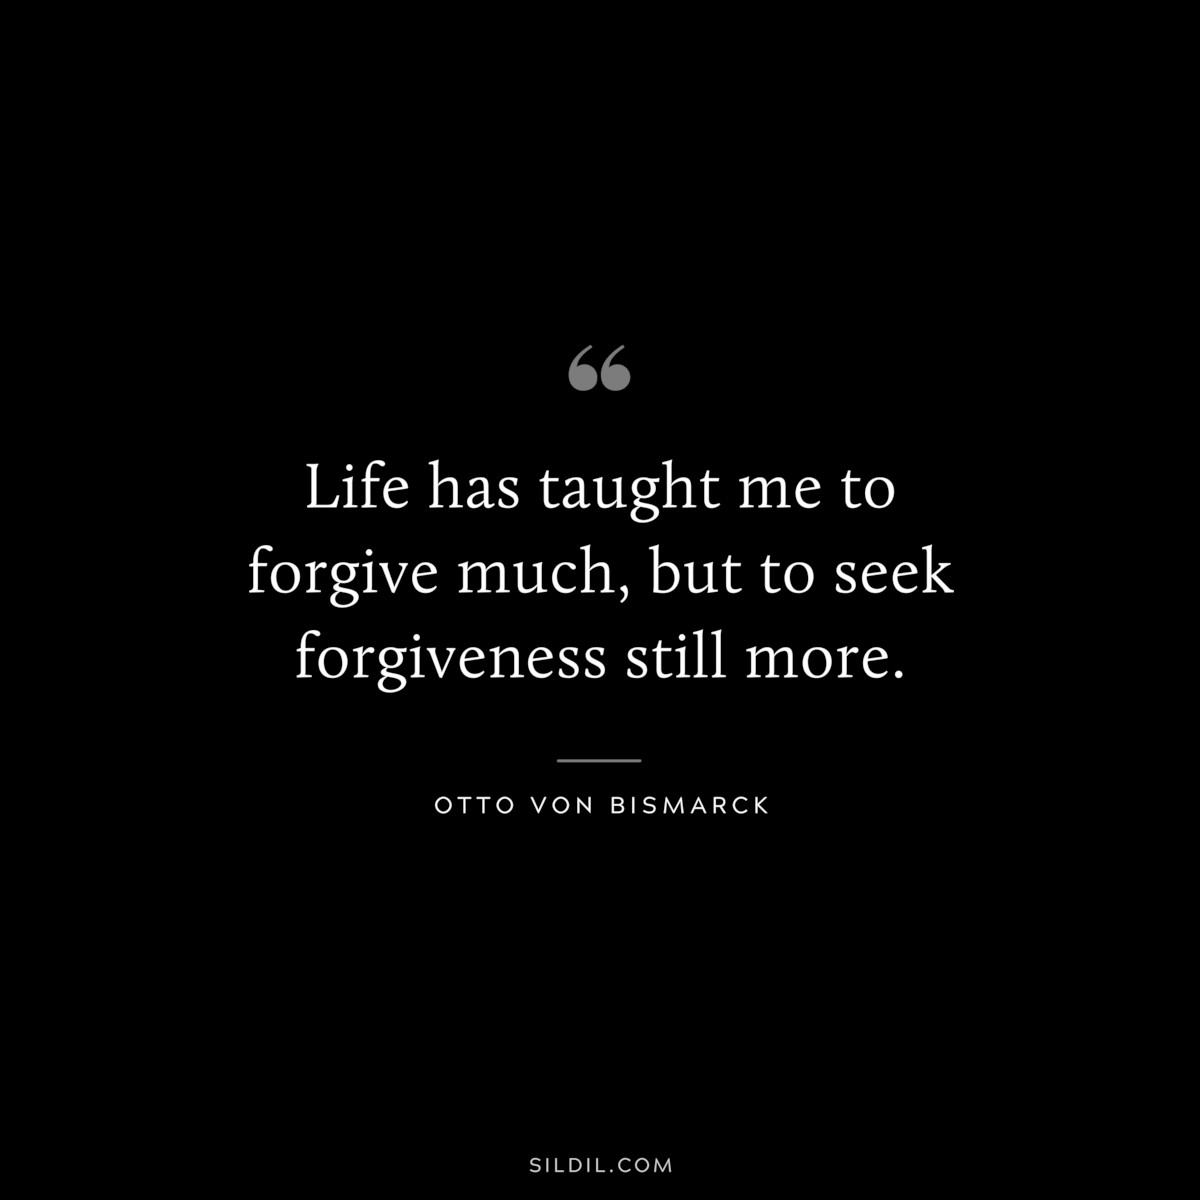 Life has taught me to forgive much, but to seek forgiveness still more. ― Otto von Bismarck